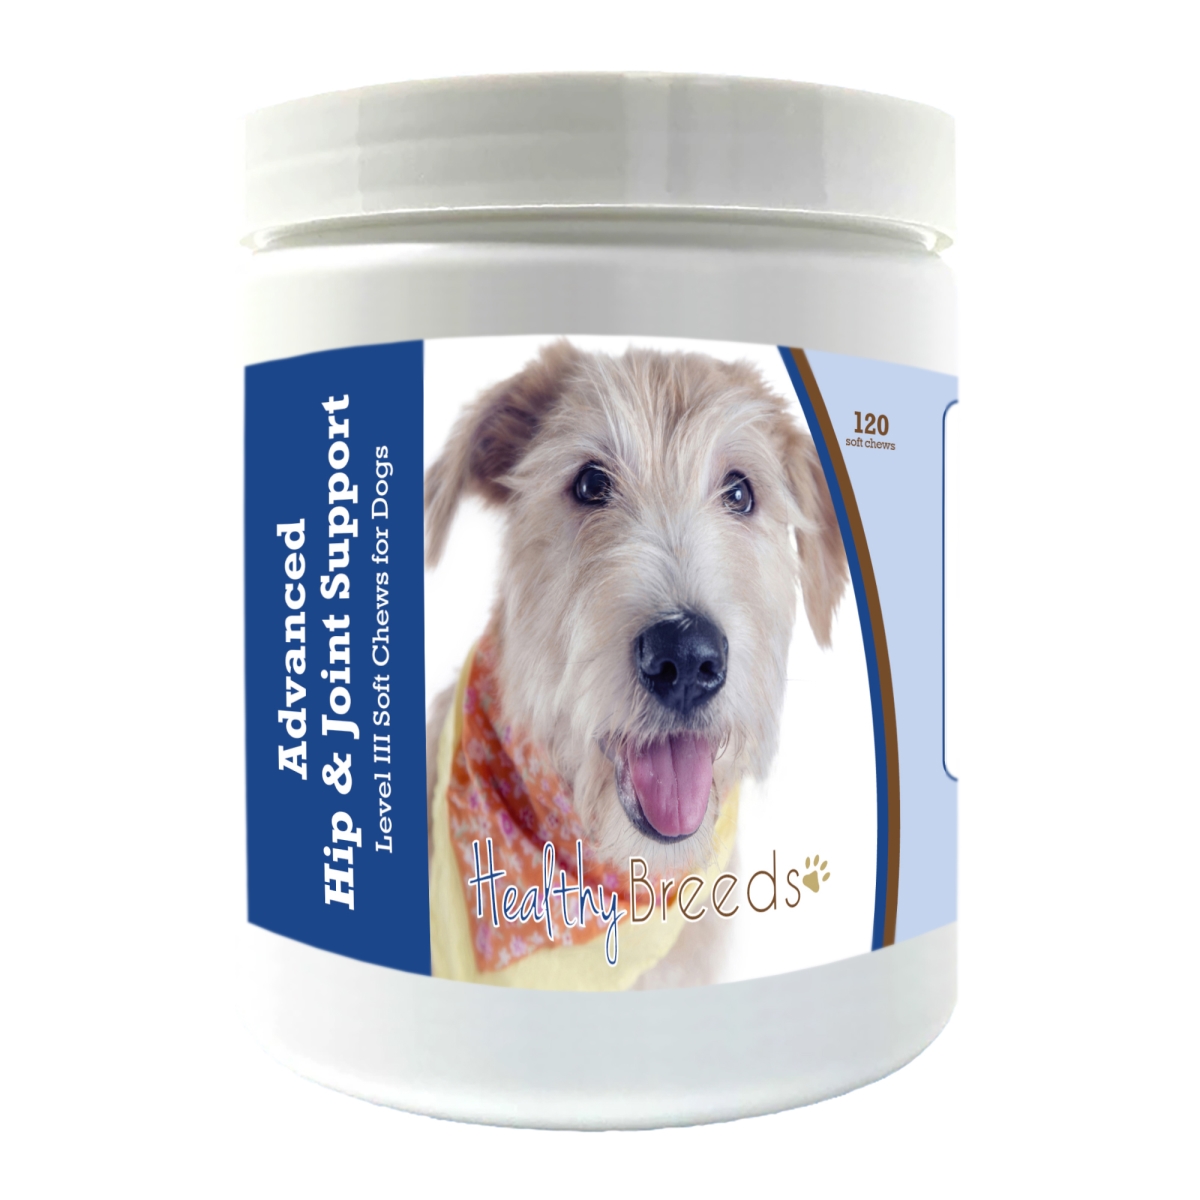 Picture of Healthy Breeds 192959898316 Glen of Imaal Terrier Advanced Hip & Joint Support Level III Soft Chews for Dogs